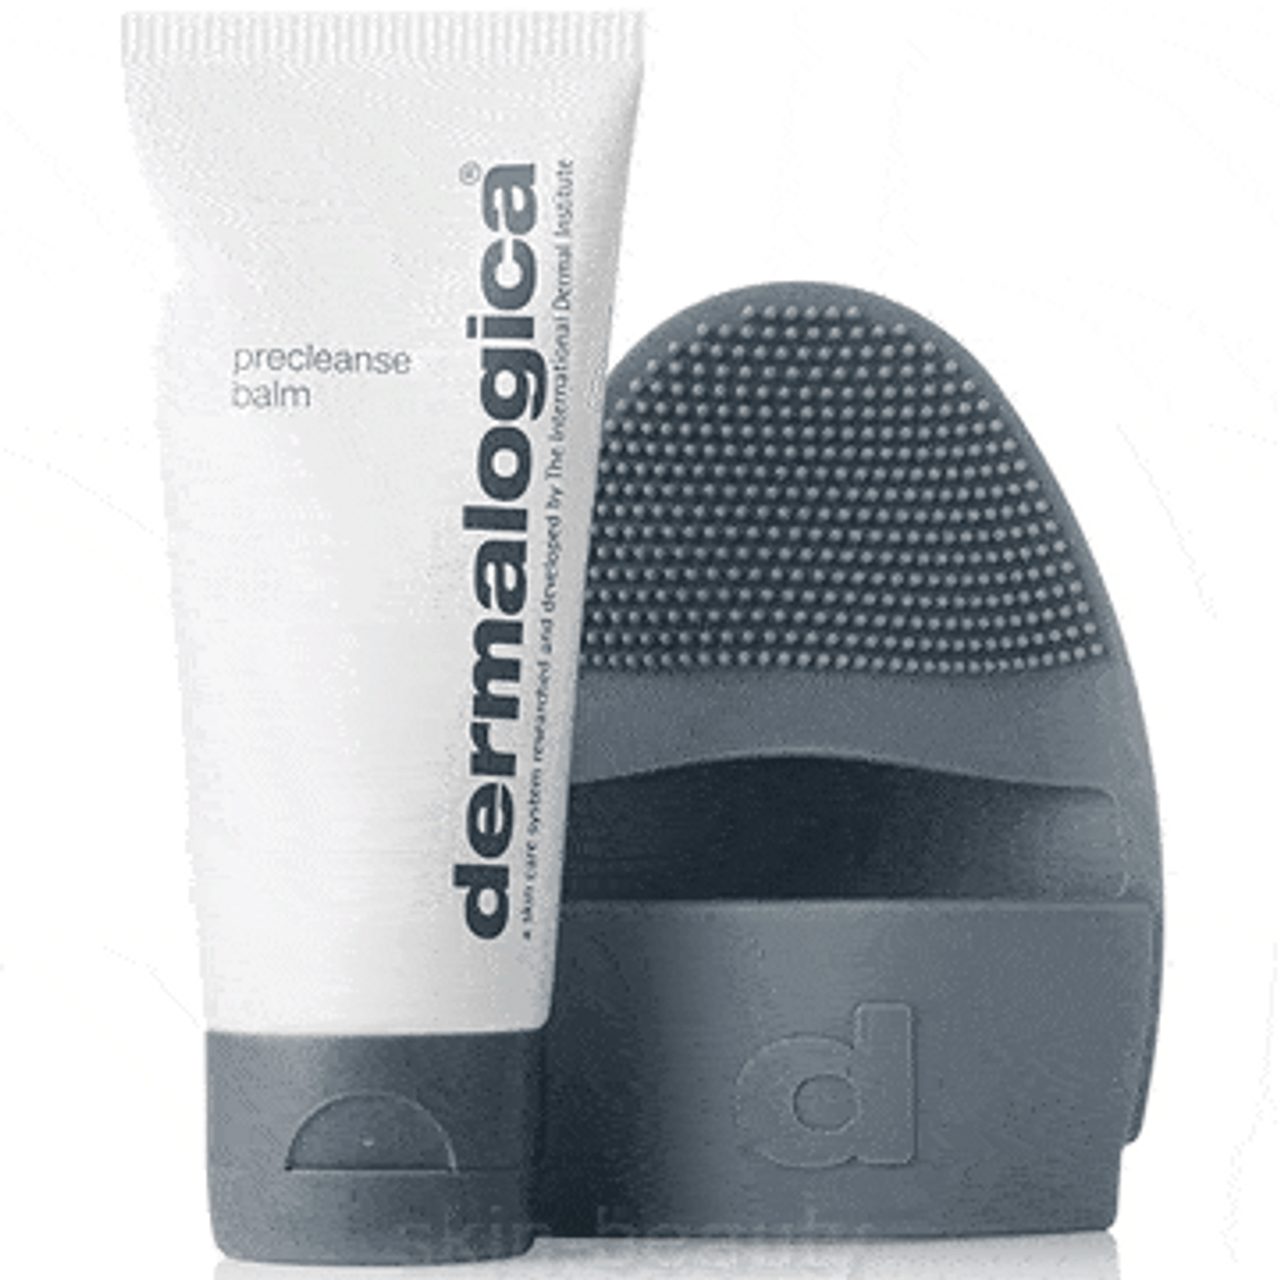 Dermalogica PreCleanse Balm with Cleansing Mitt - 3 oz (111266)